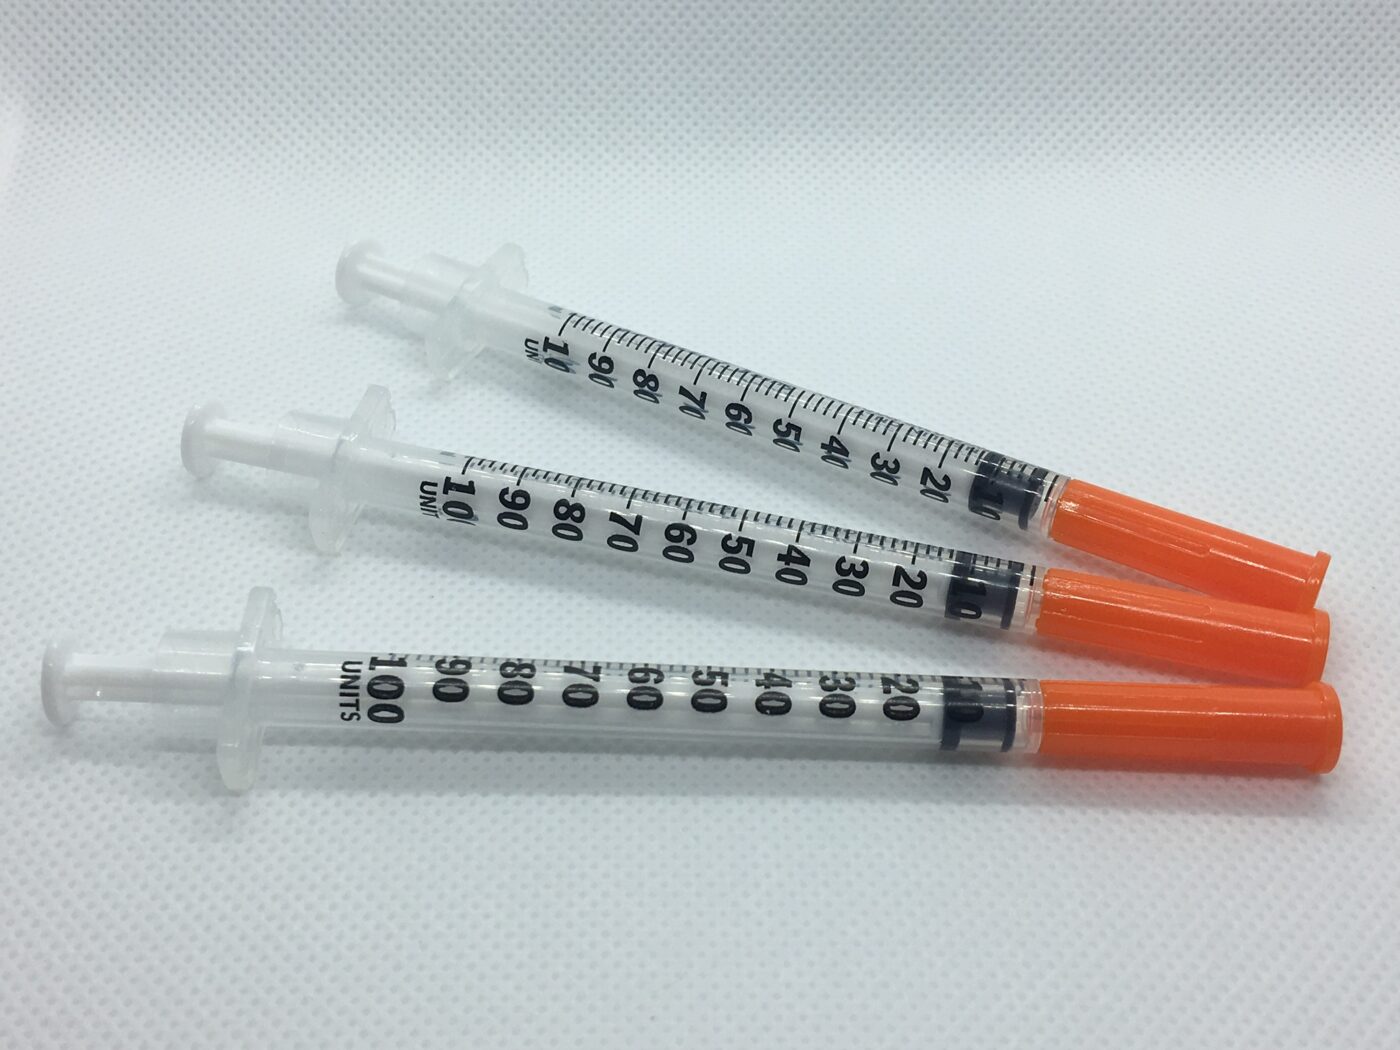 Ensuring Quality: Trusted Suppliers For Your Diabetic Syringe Needs - Shaper of Light